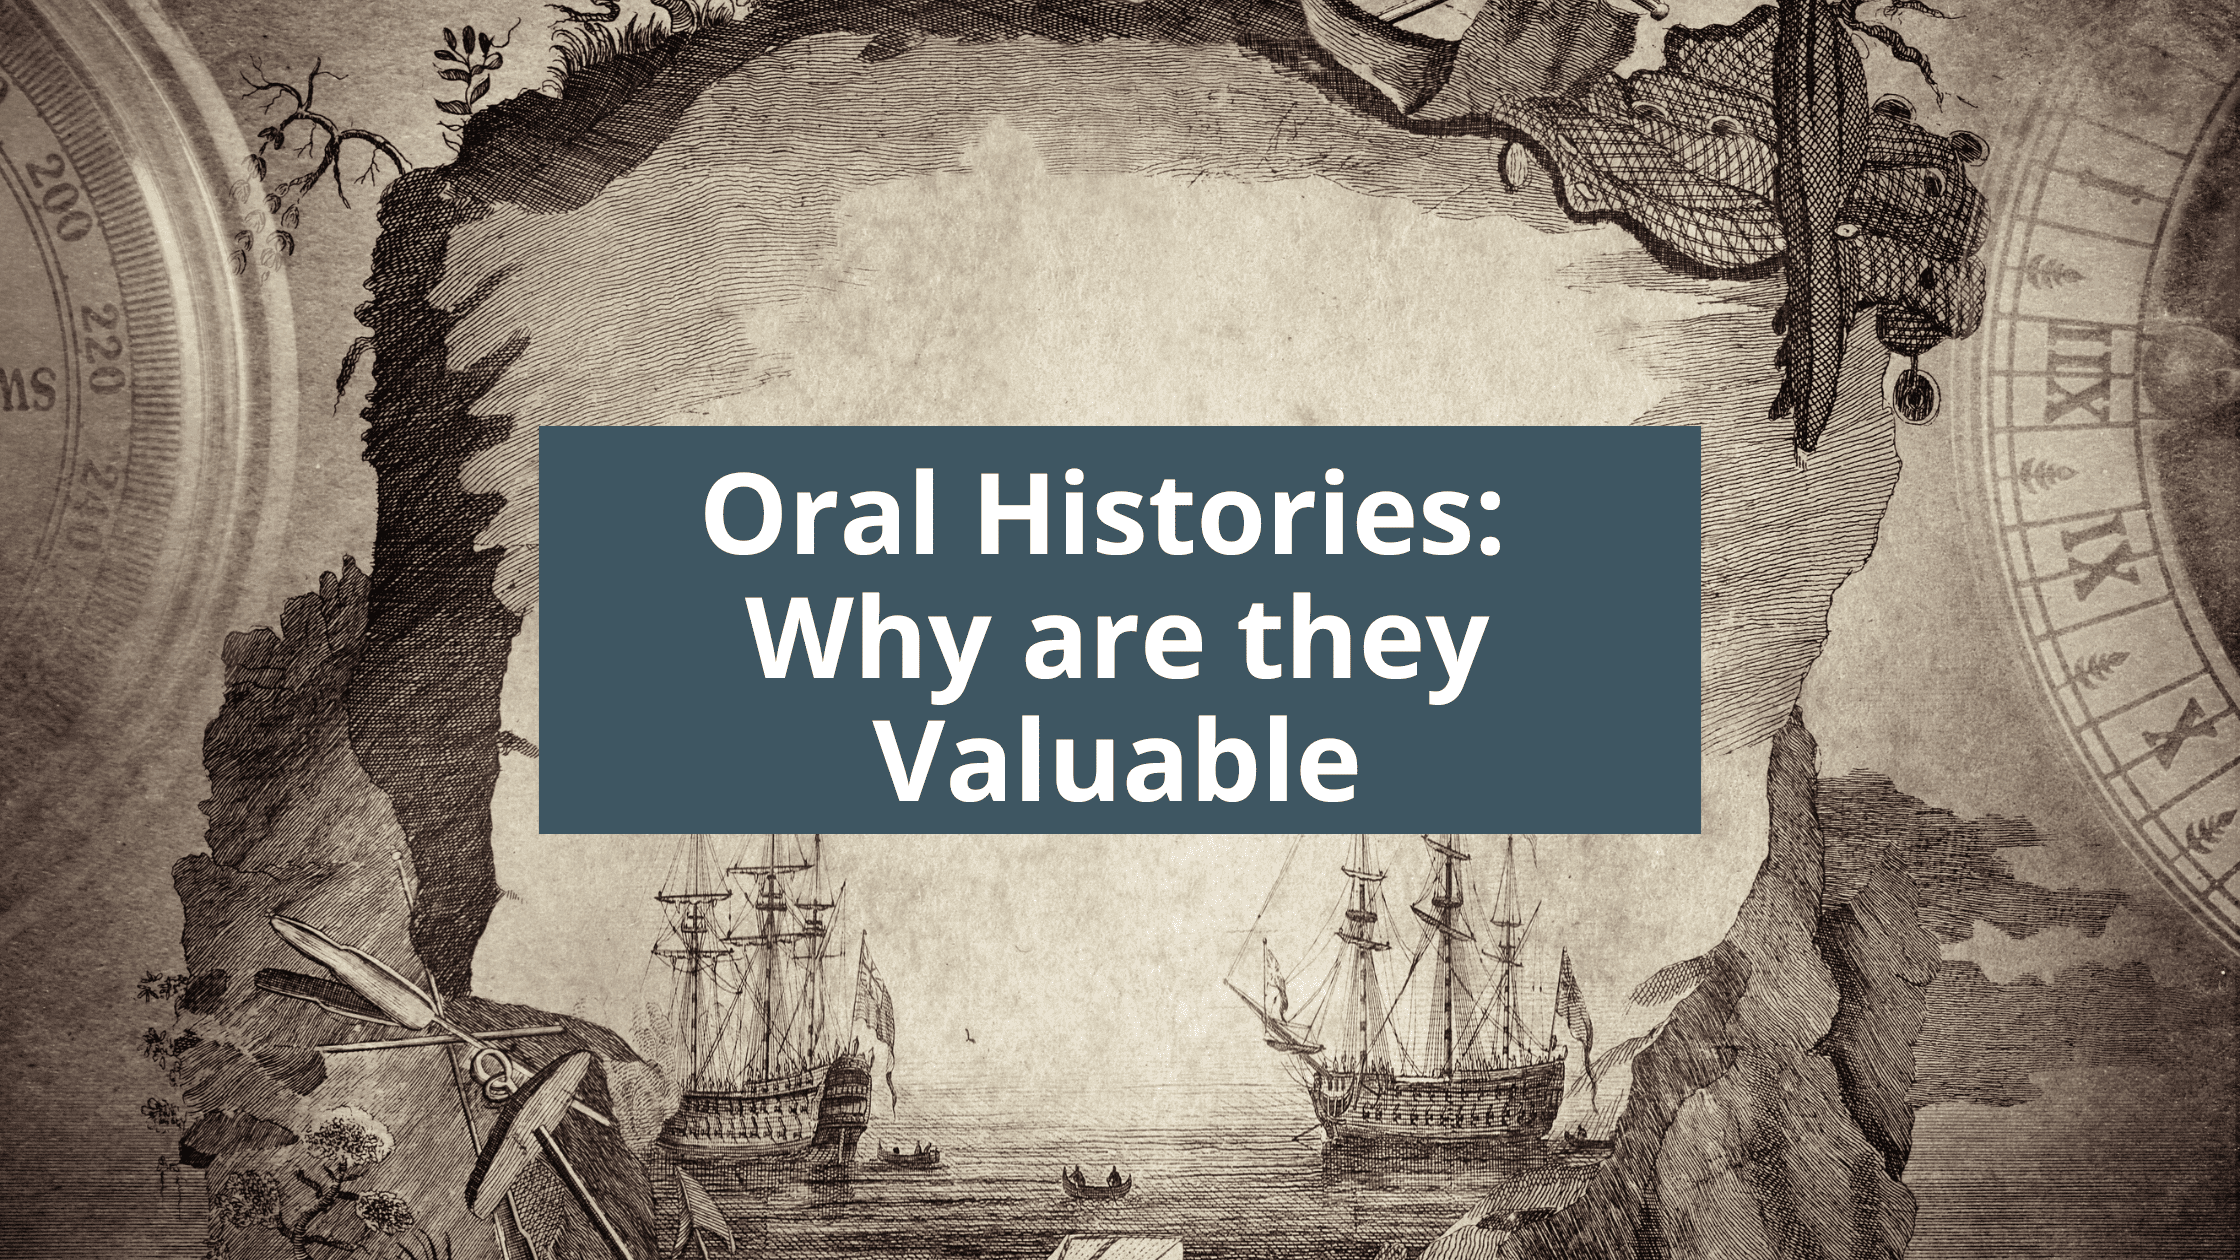 What Are Oral Histories And Why Are They Valuable